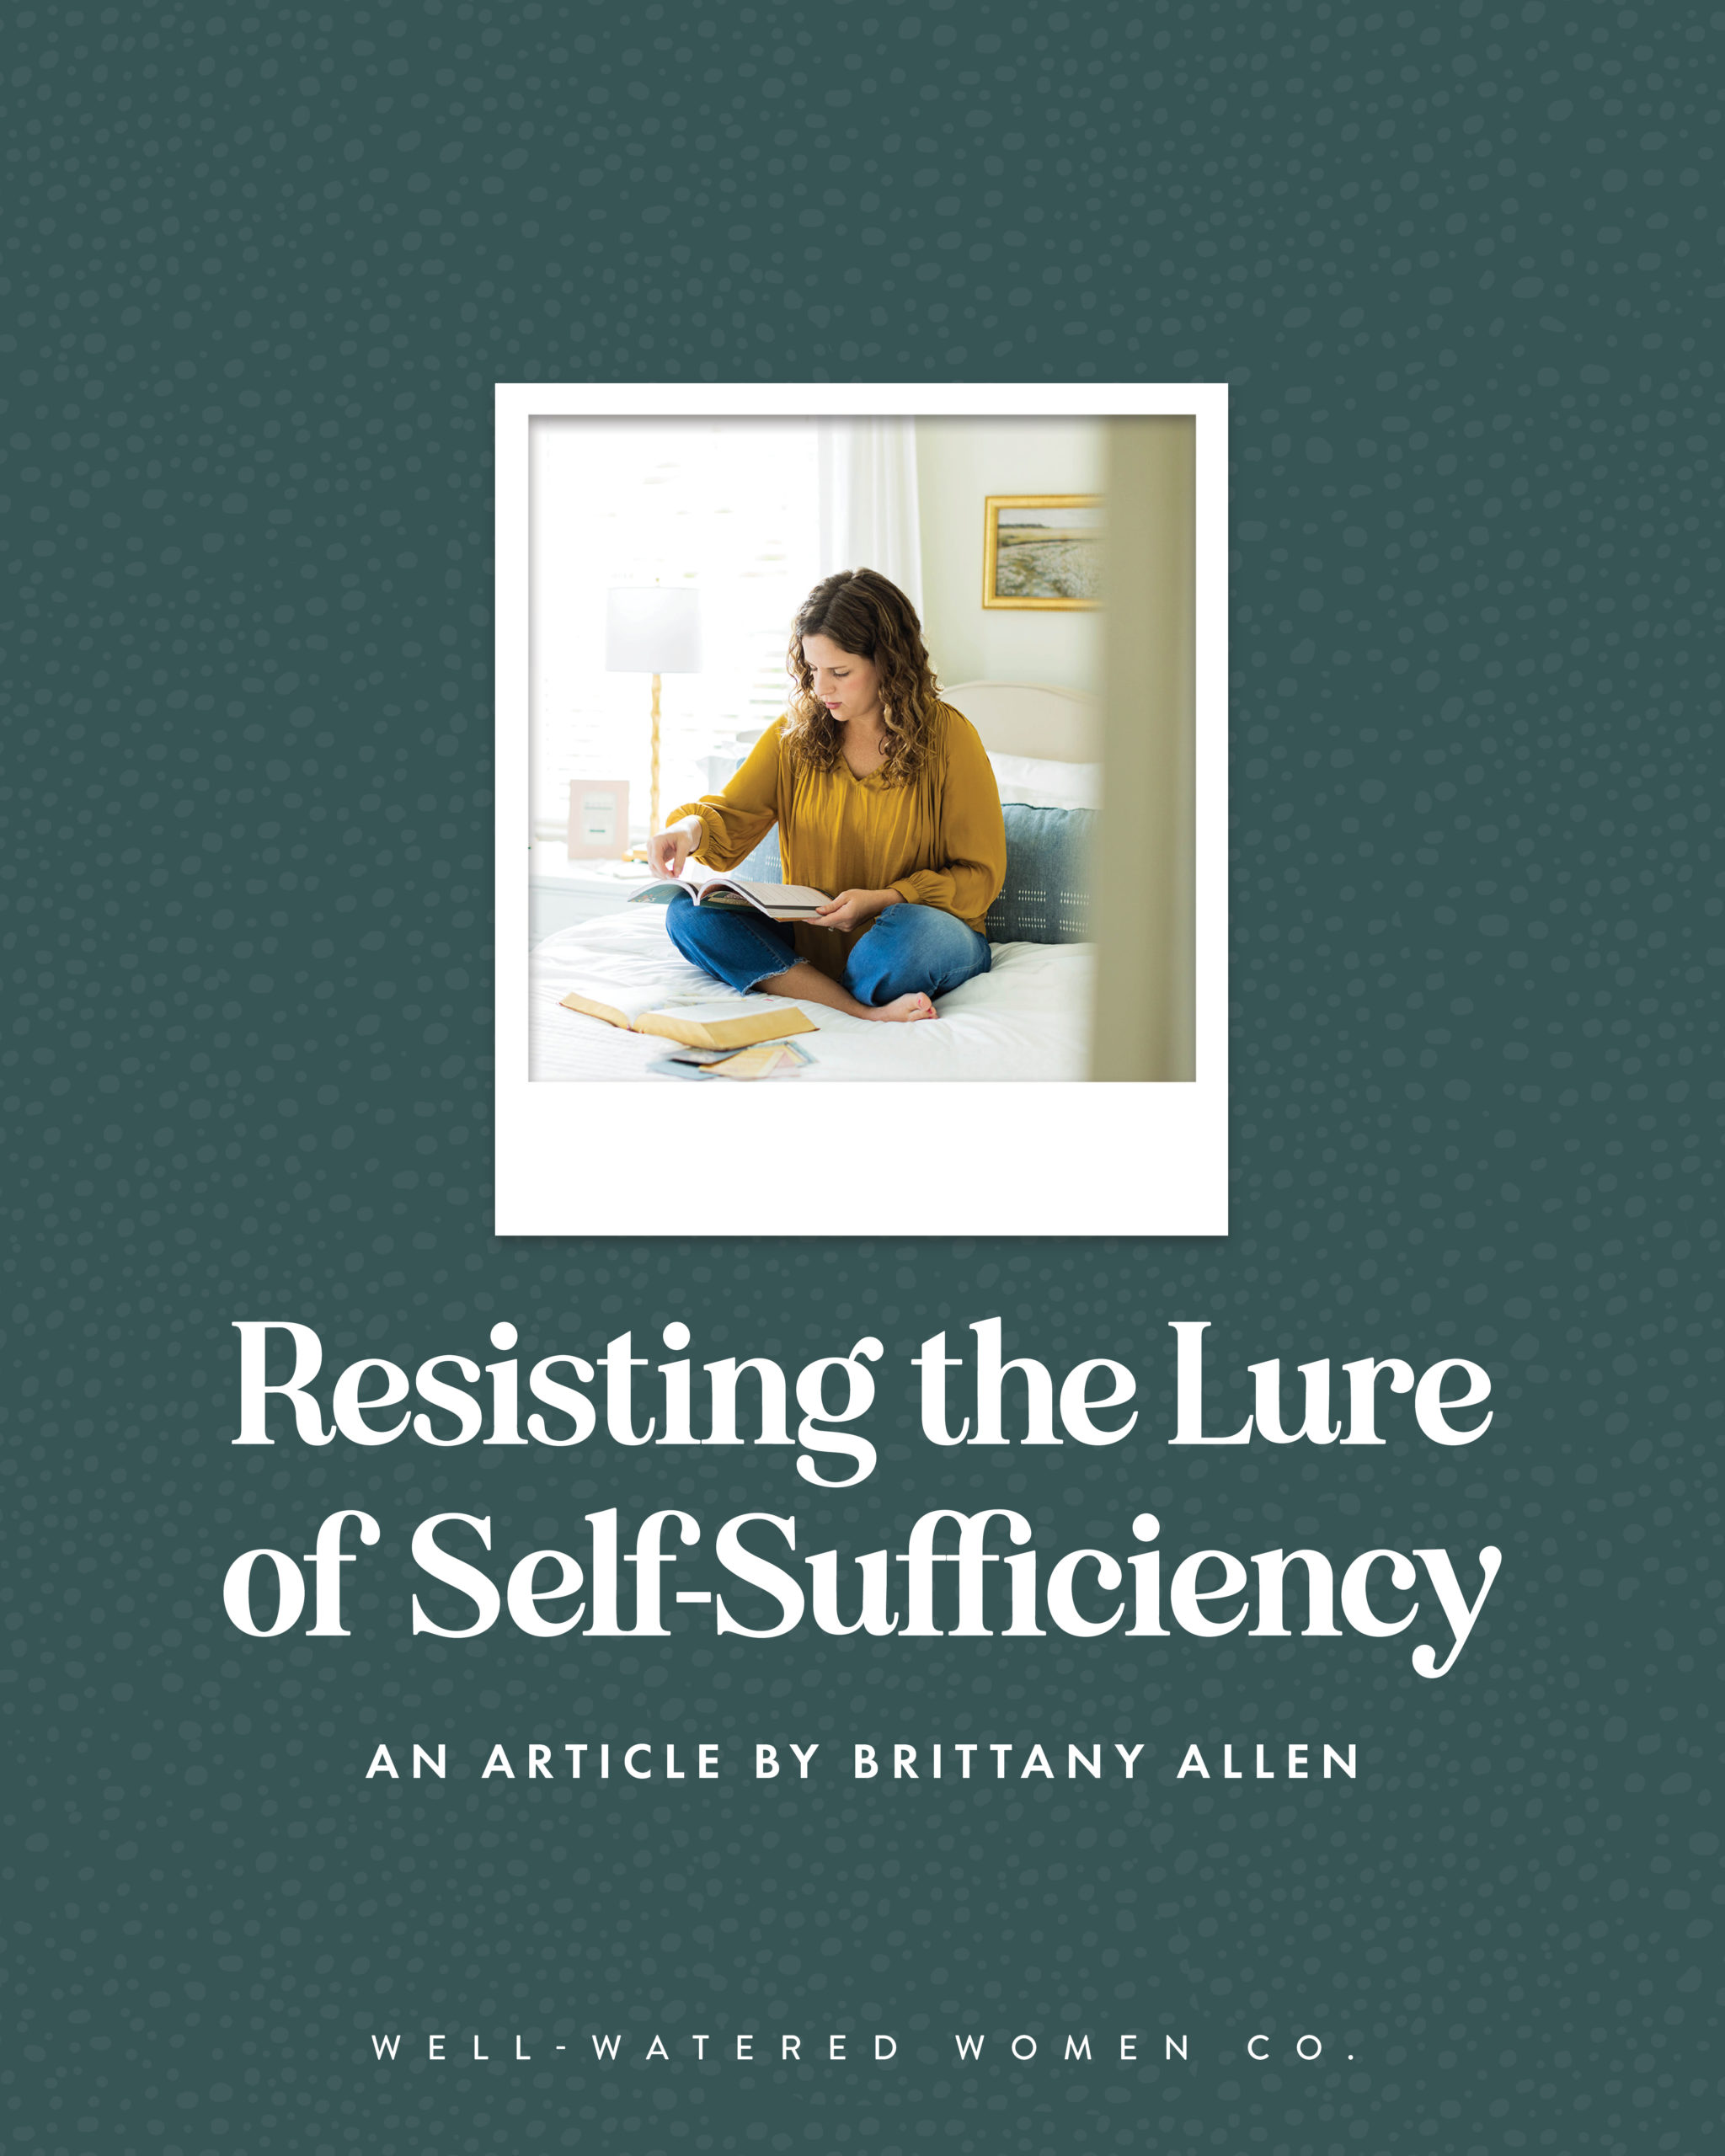 Resisting the Lure of Self-Sufficiency - an article from Well-Watered Women